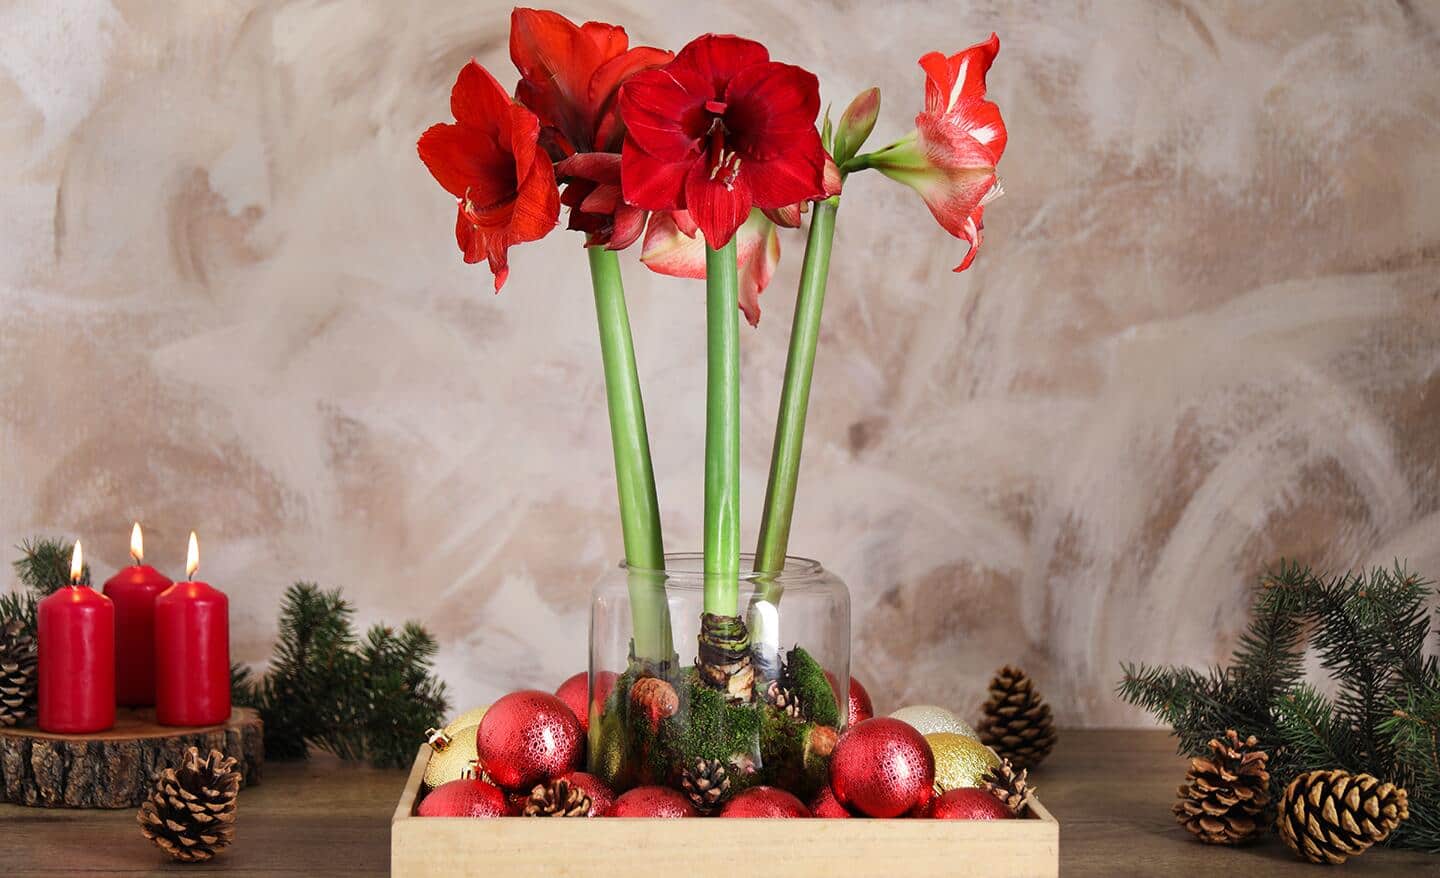 Red amaryllis bulbs in a glass container